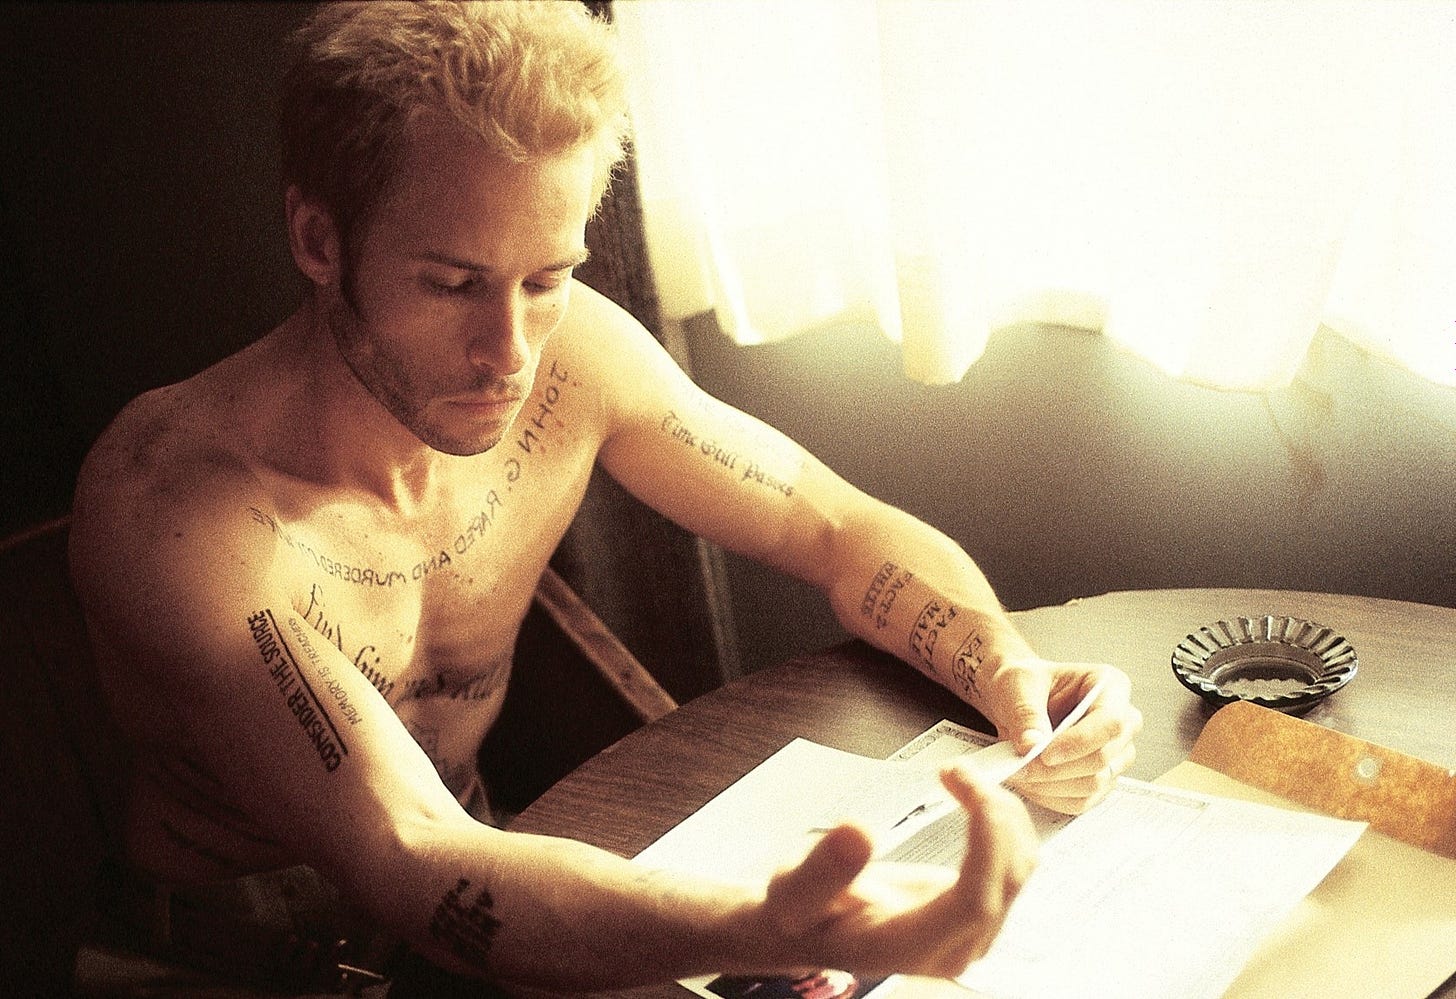 Memento. 2000. Written and directed by Christopher Nolan | MoMA